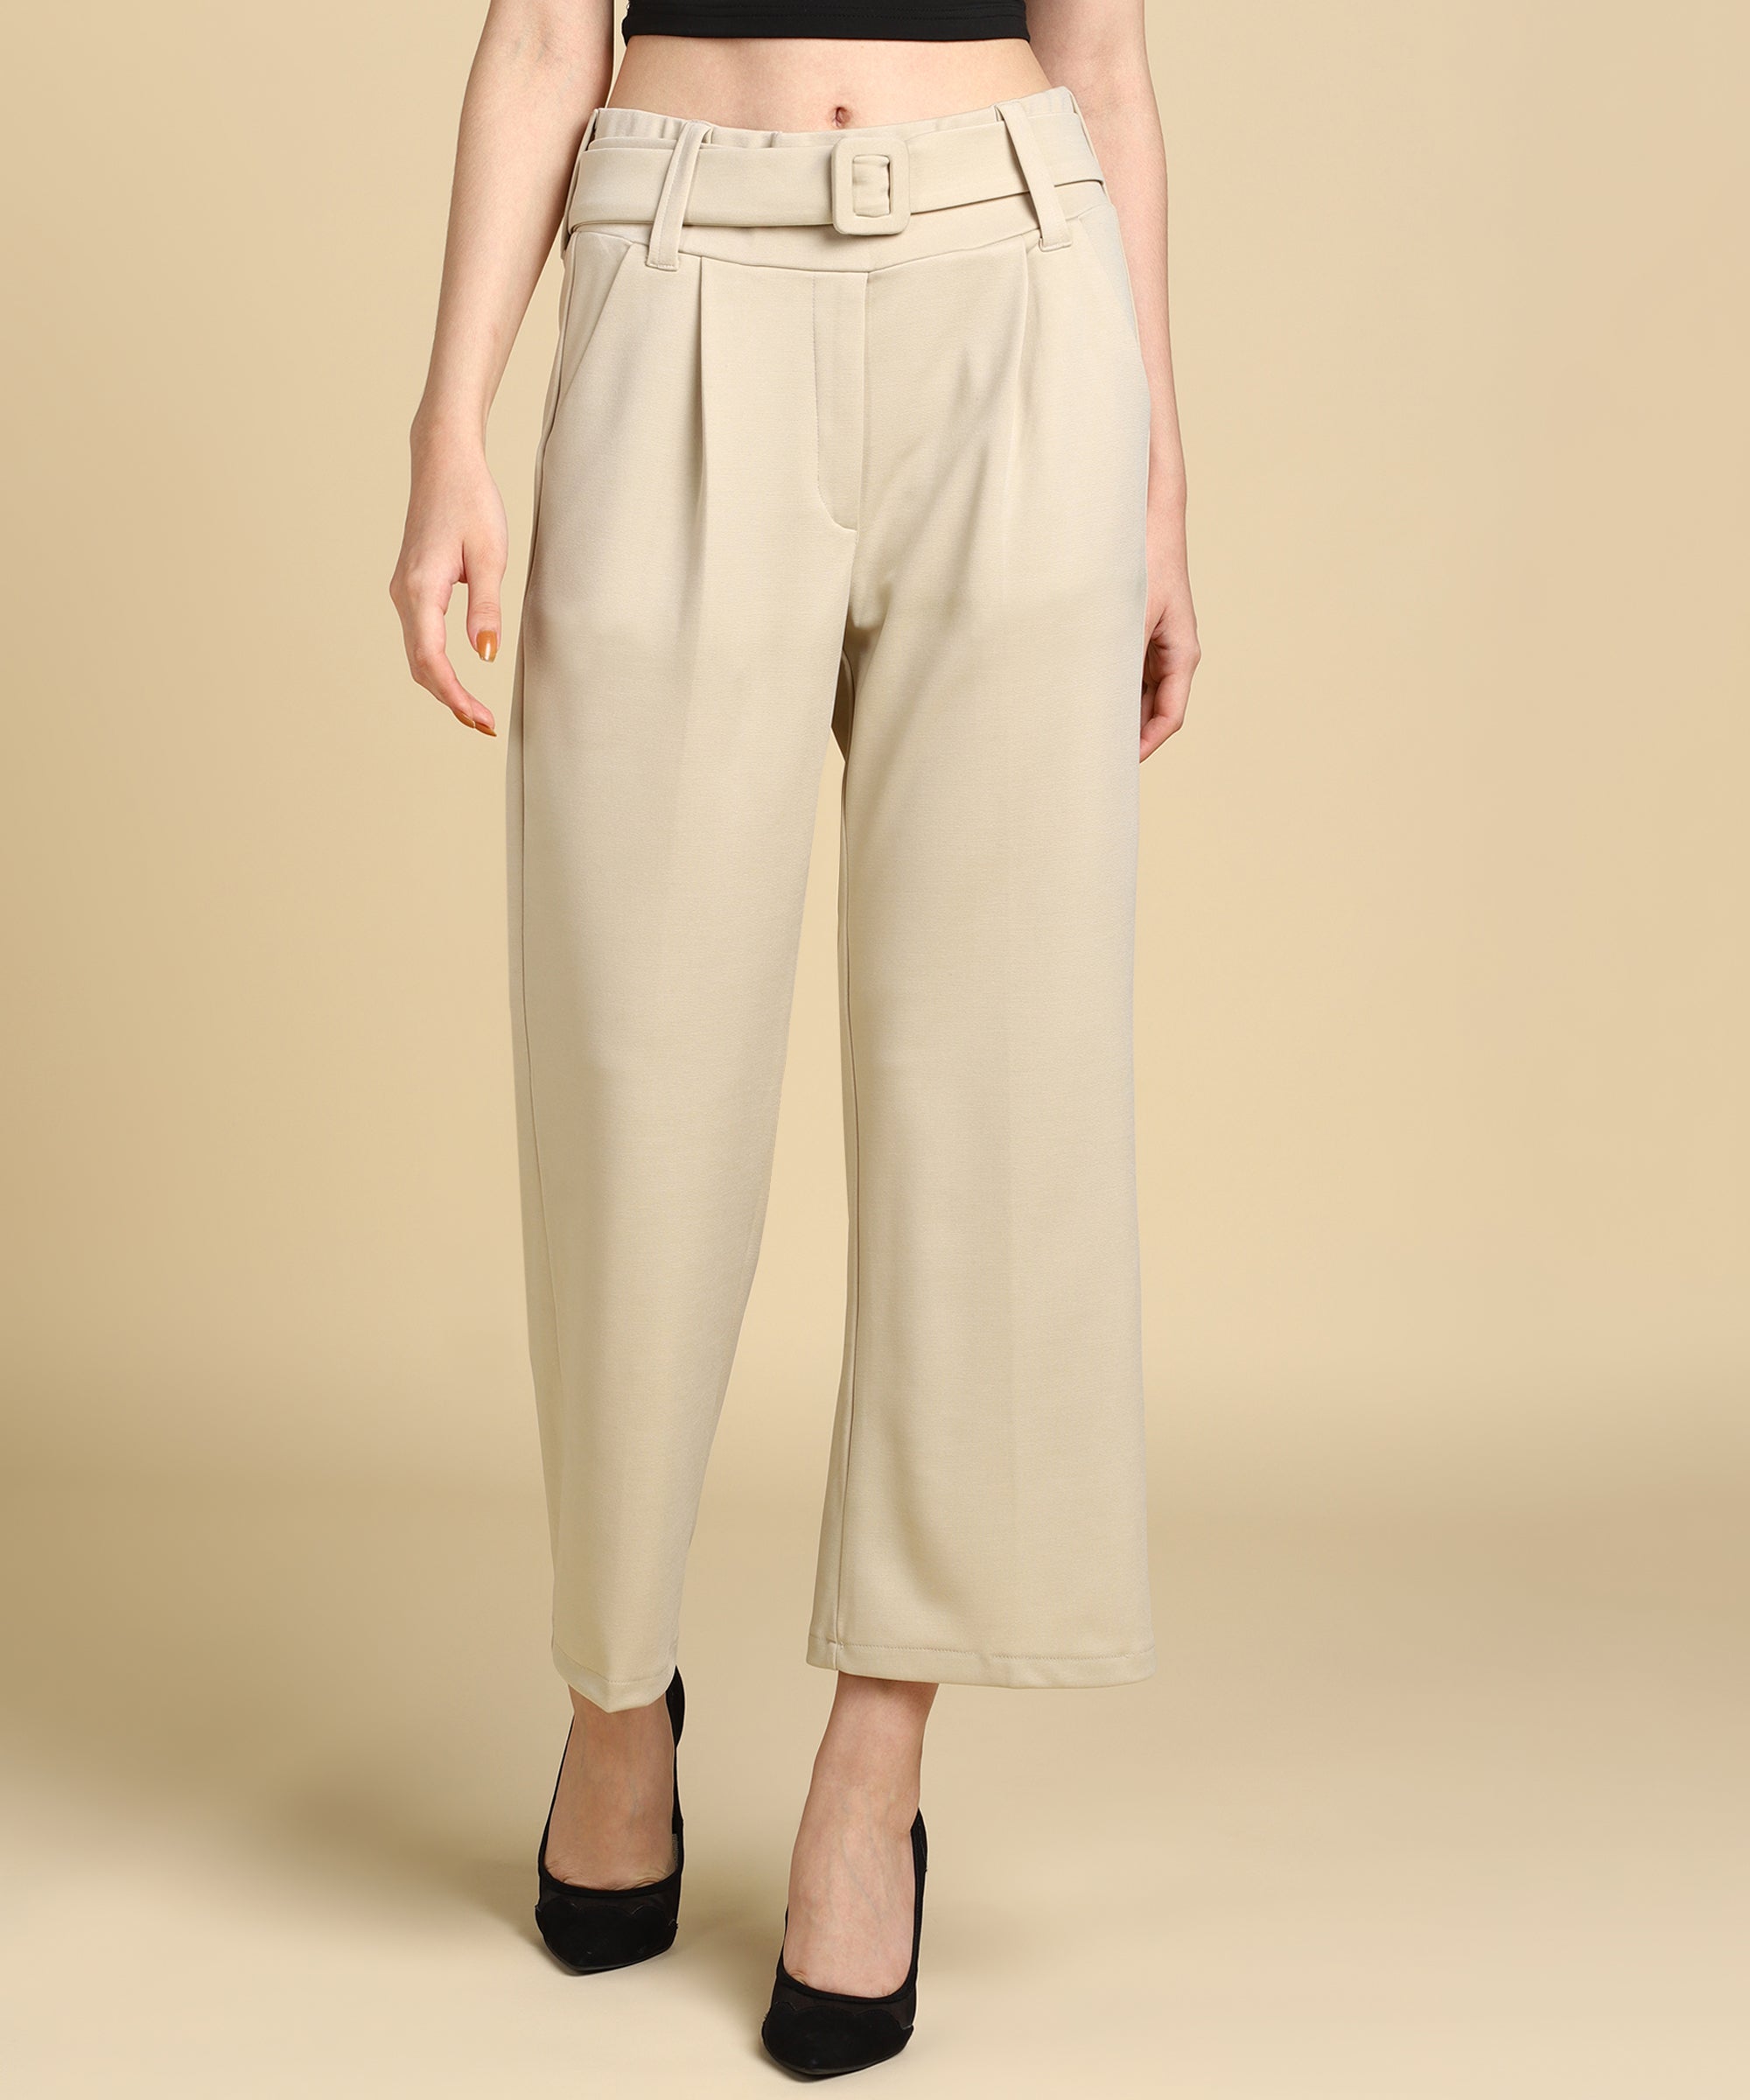 Kook N Keech Women Regular Fit Parallel Trousers Price in India, Full  Specifications & Offers | DTashion.com